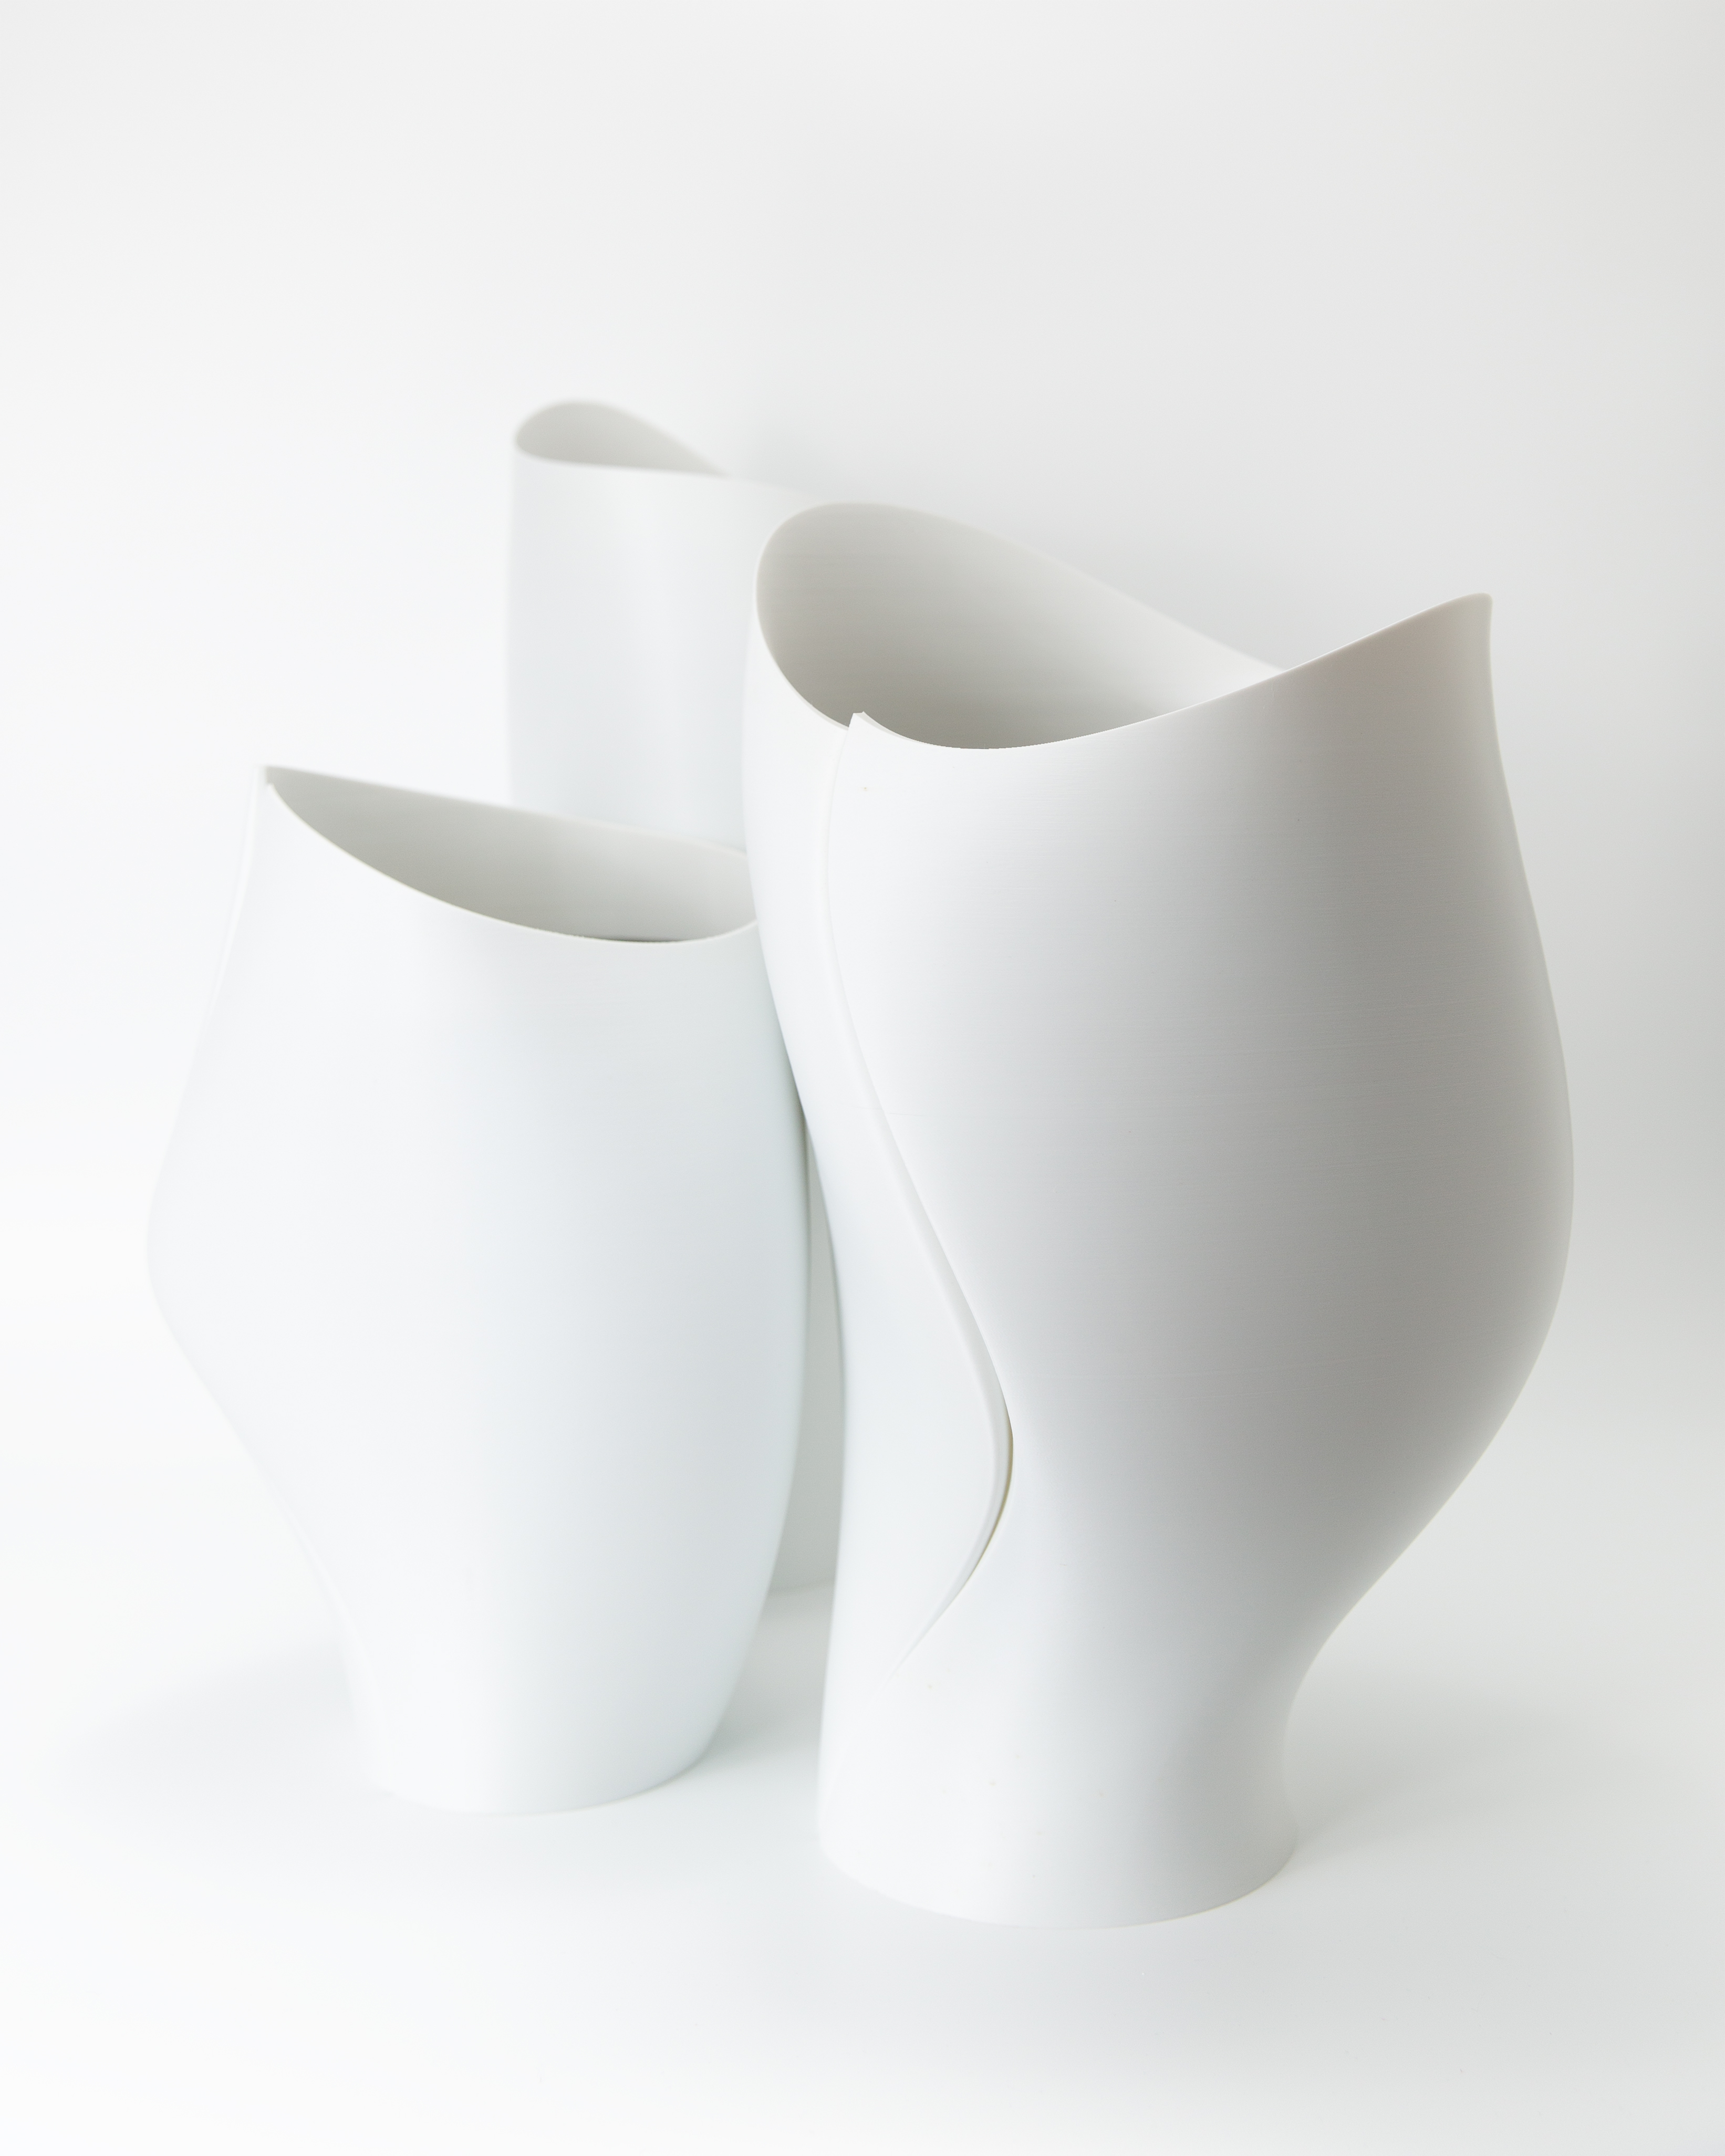 Photograph of Three Waste Bins Designed for an Architect's Wife with Recyclable Waste Bin in the Foreground, 3-D Printed Prototypes, Wet, Dry & Recycle β, A Preview of New Work Currently in Development: Three Waste Bins, J.Travis Bennett Russett